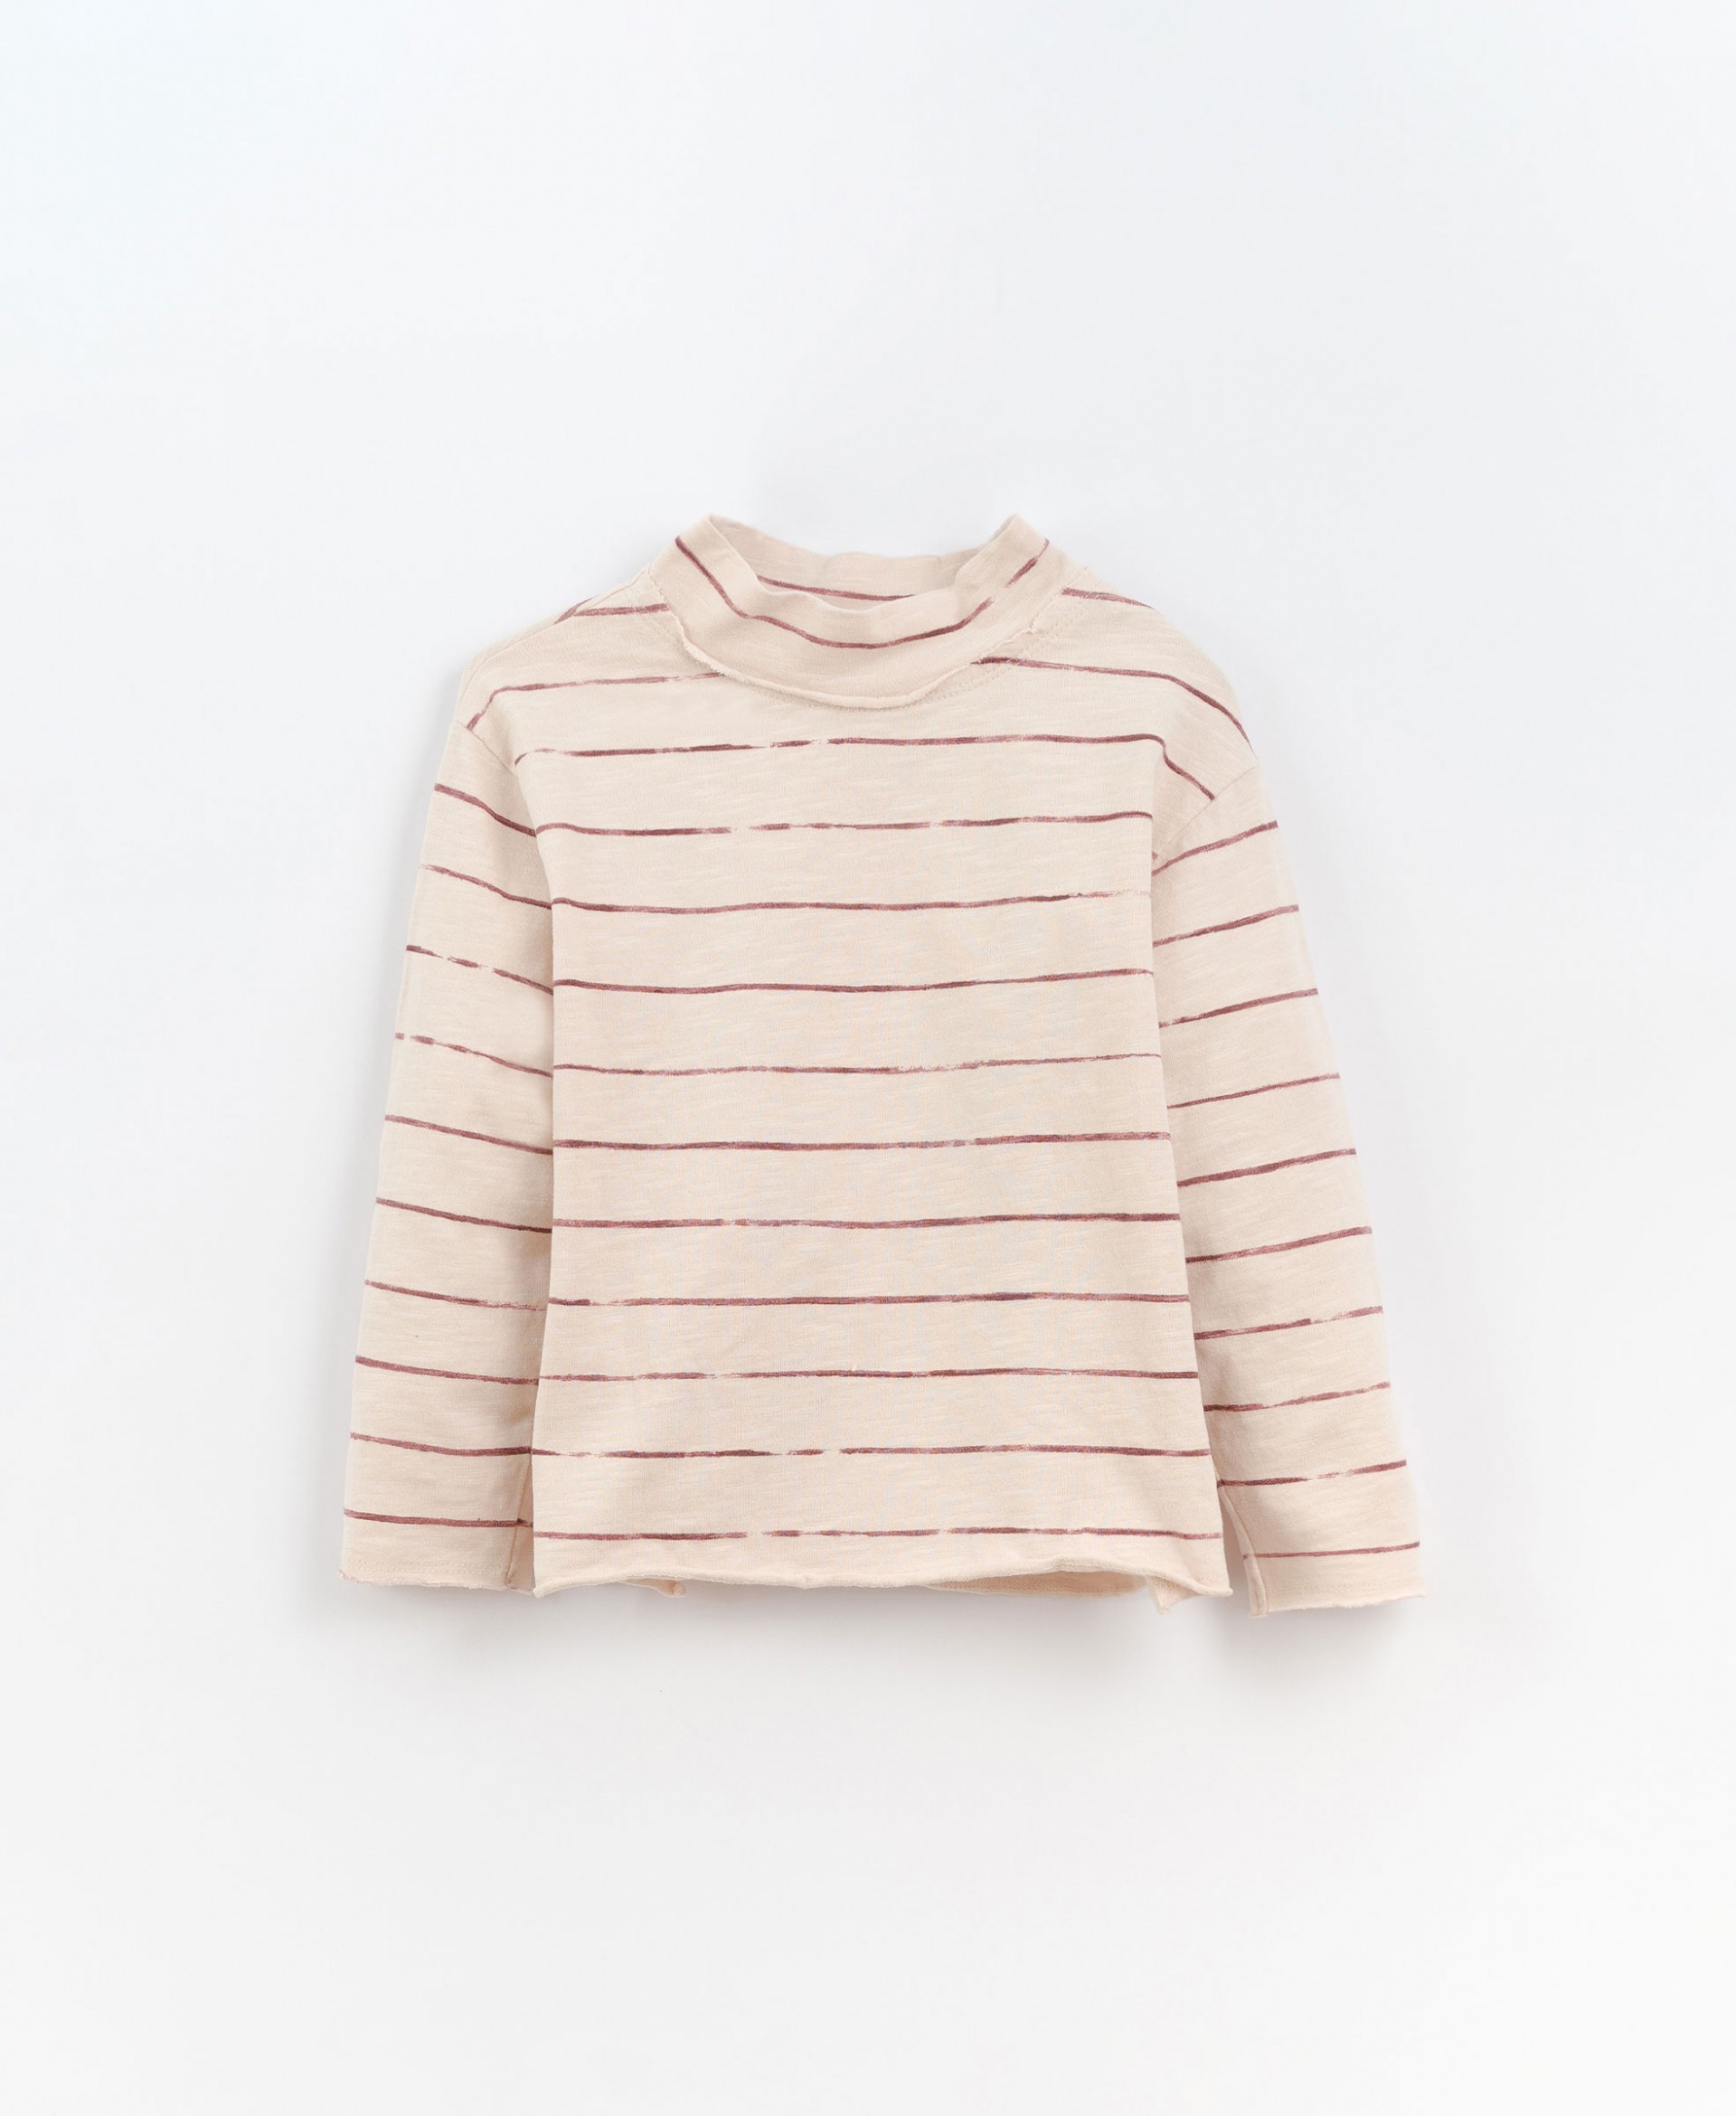 Striped T-shirt with half collar | Culinary